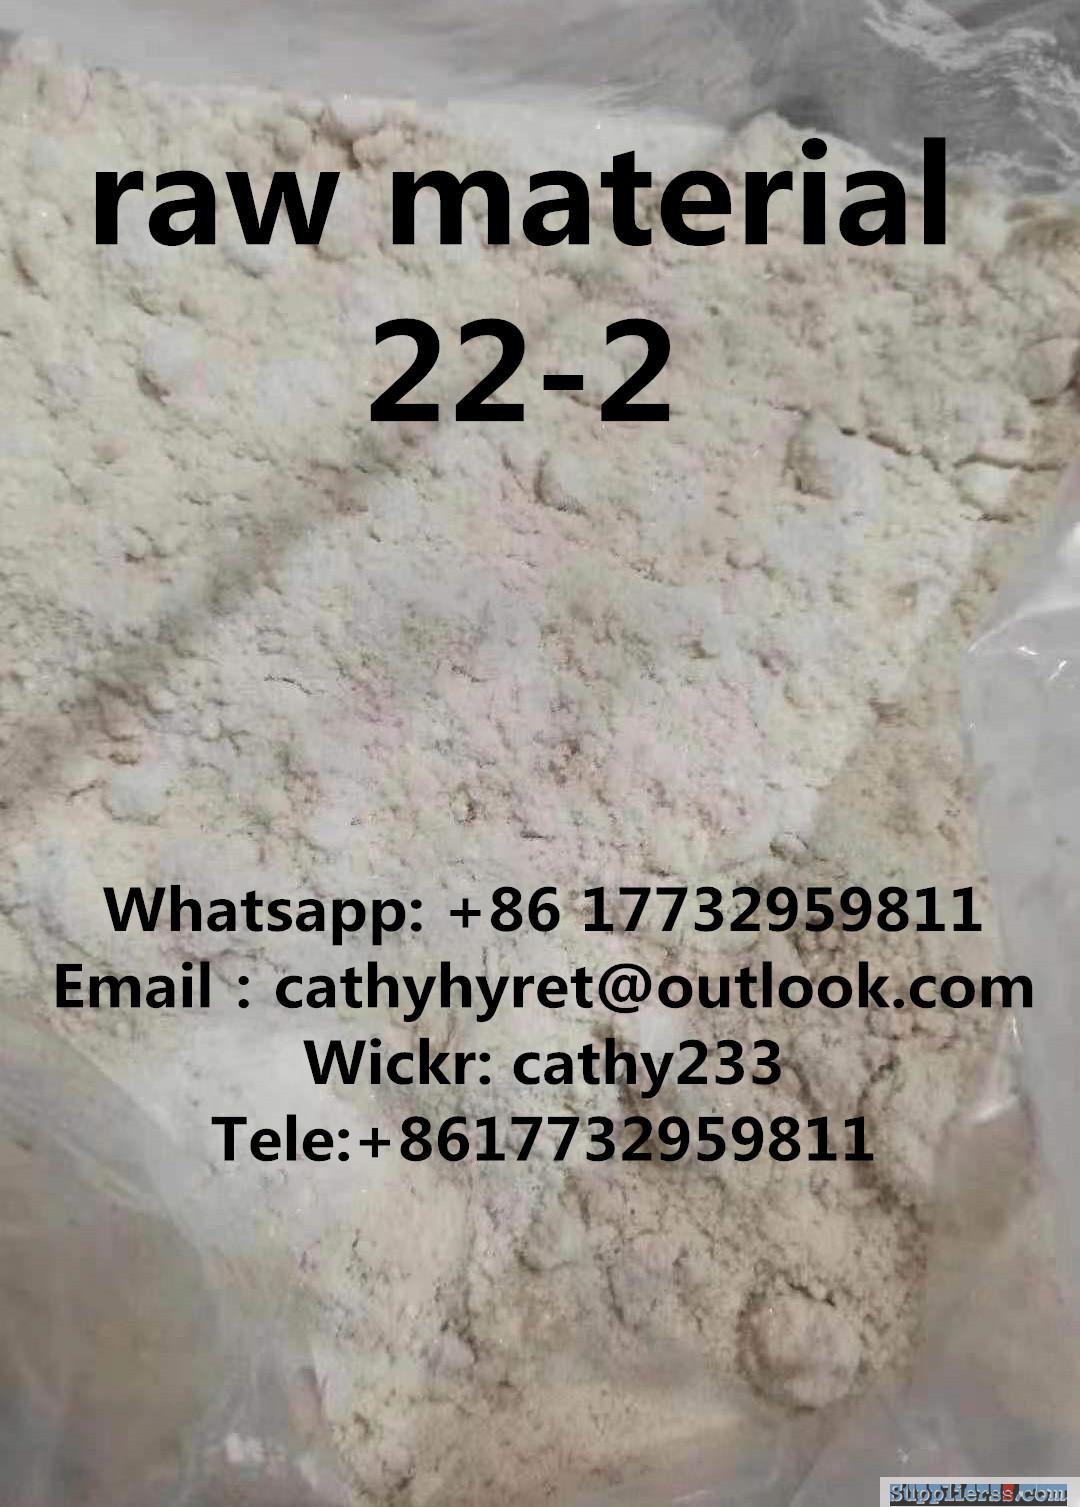 Raw material of f 22-2 cathyhyret@outlook.com